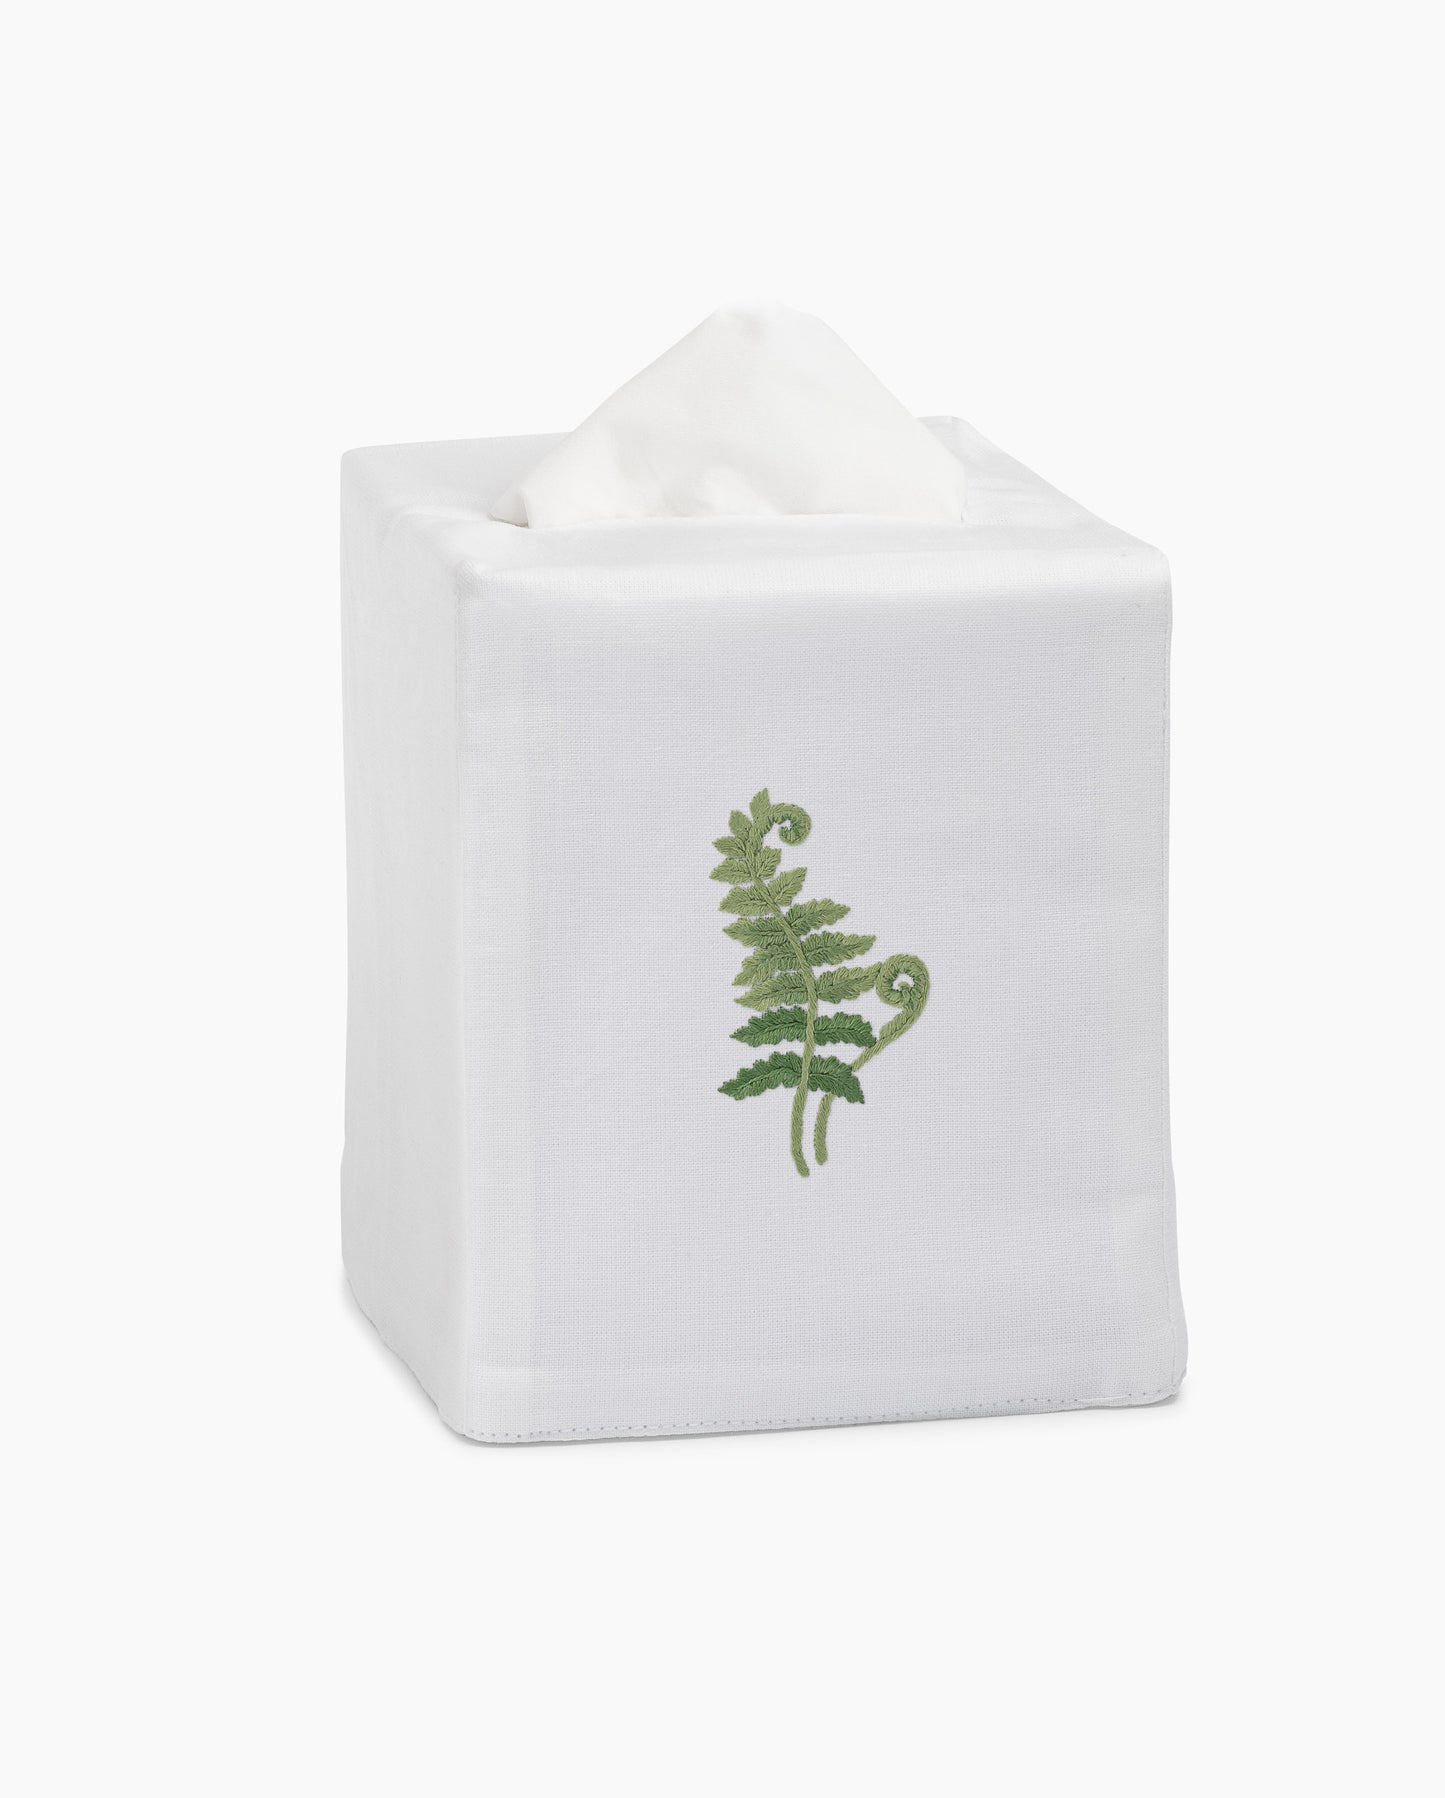 Fern Fronds Tissue Box Cover